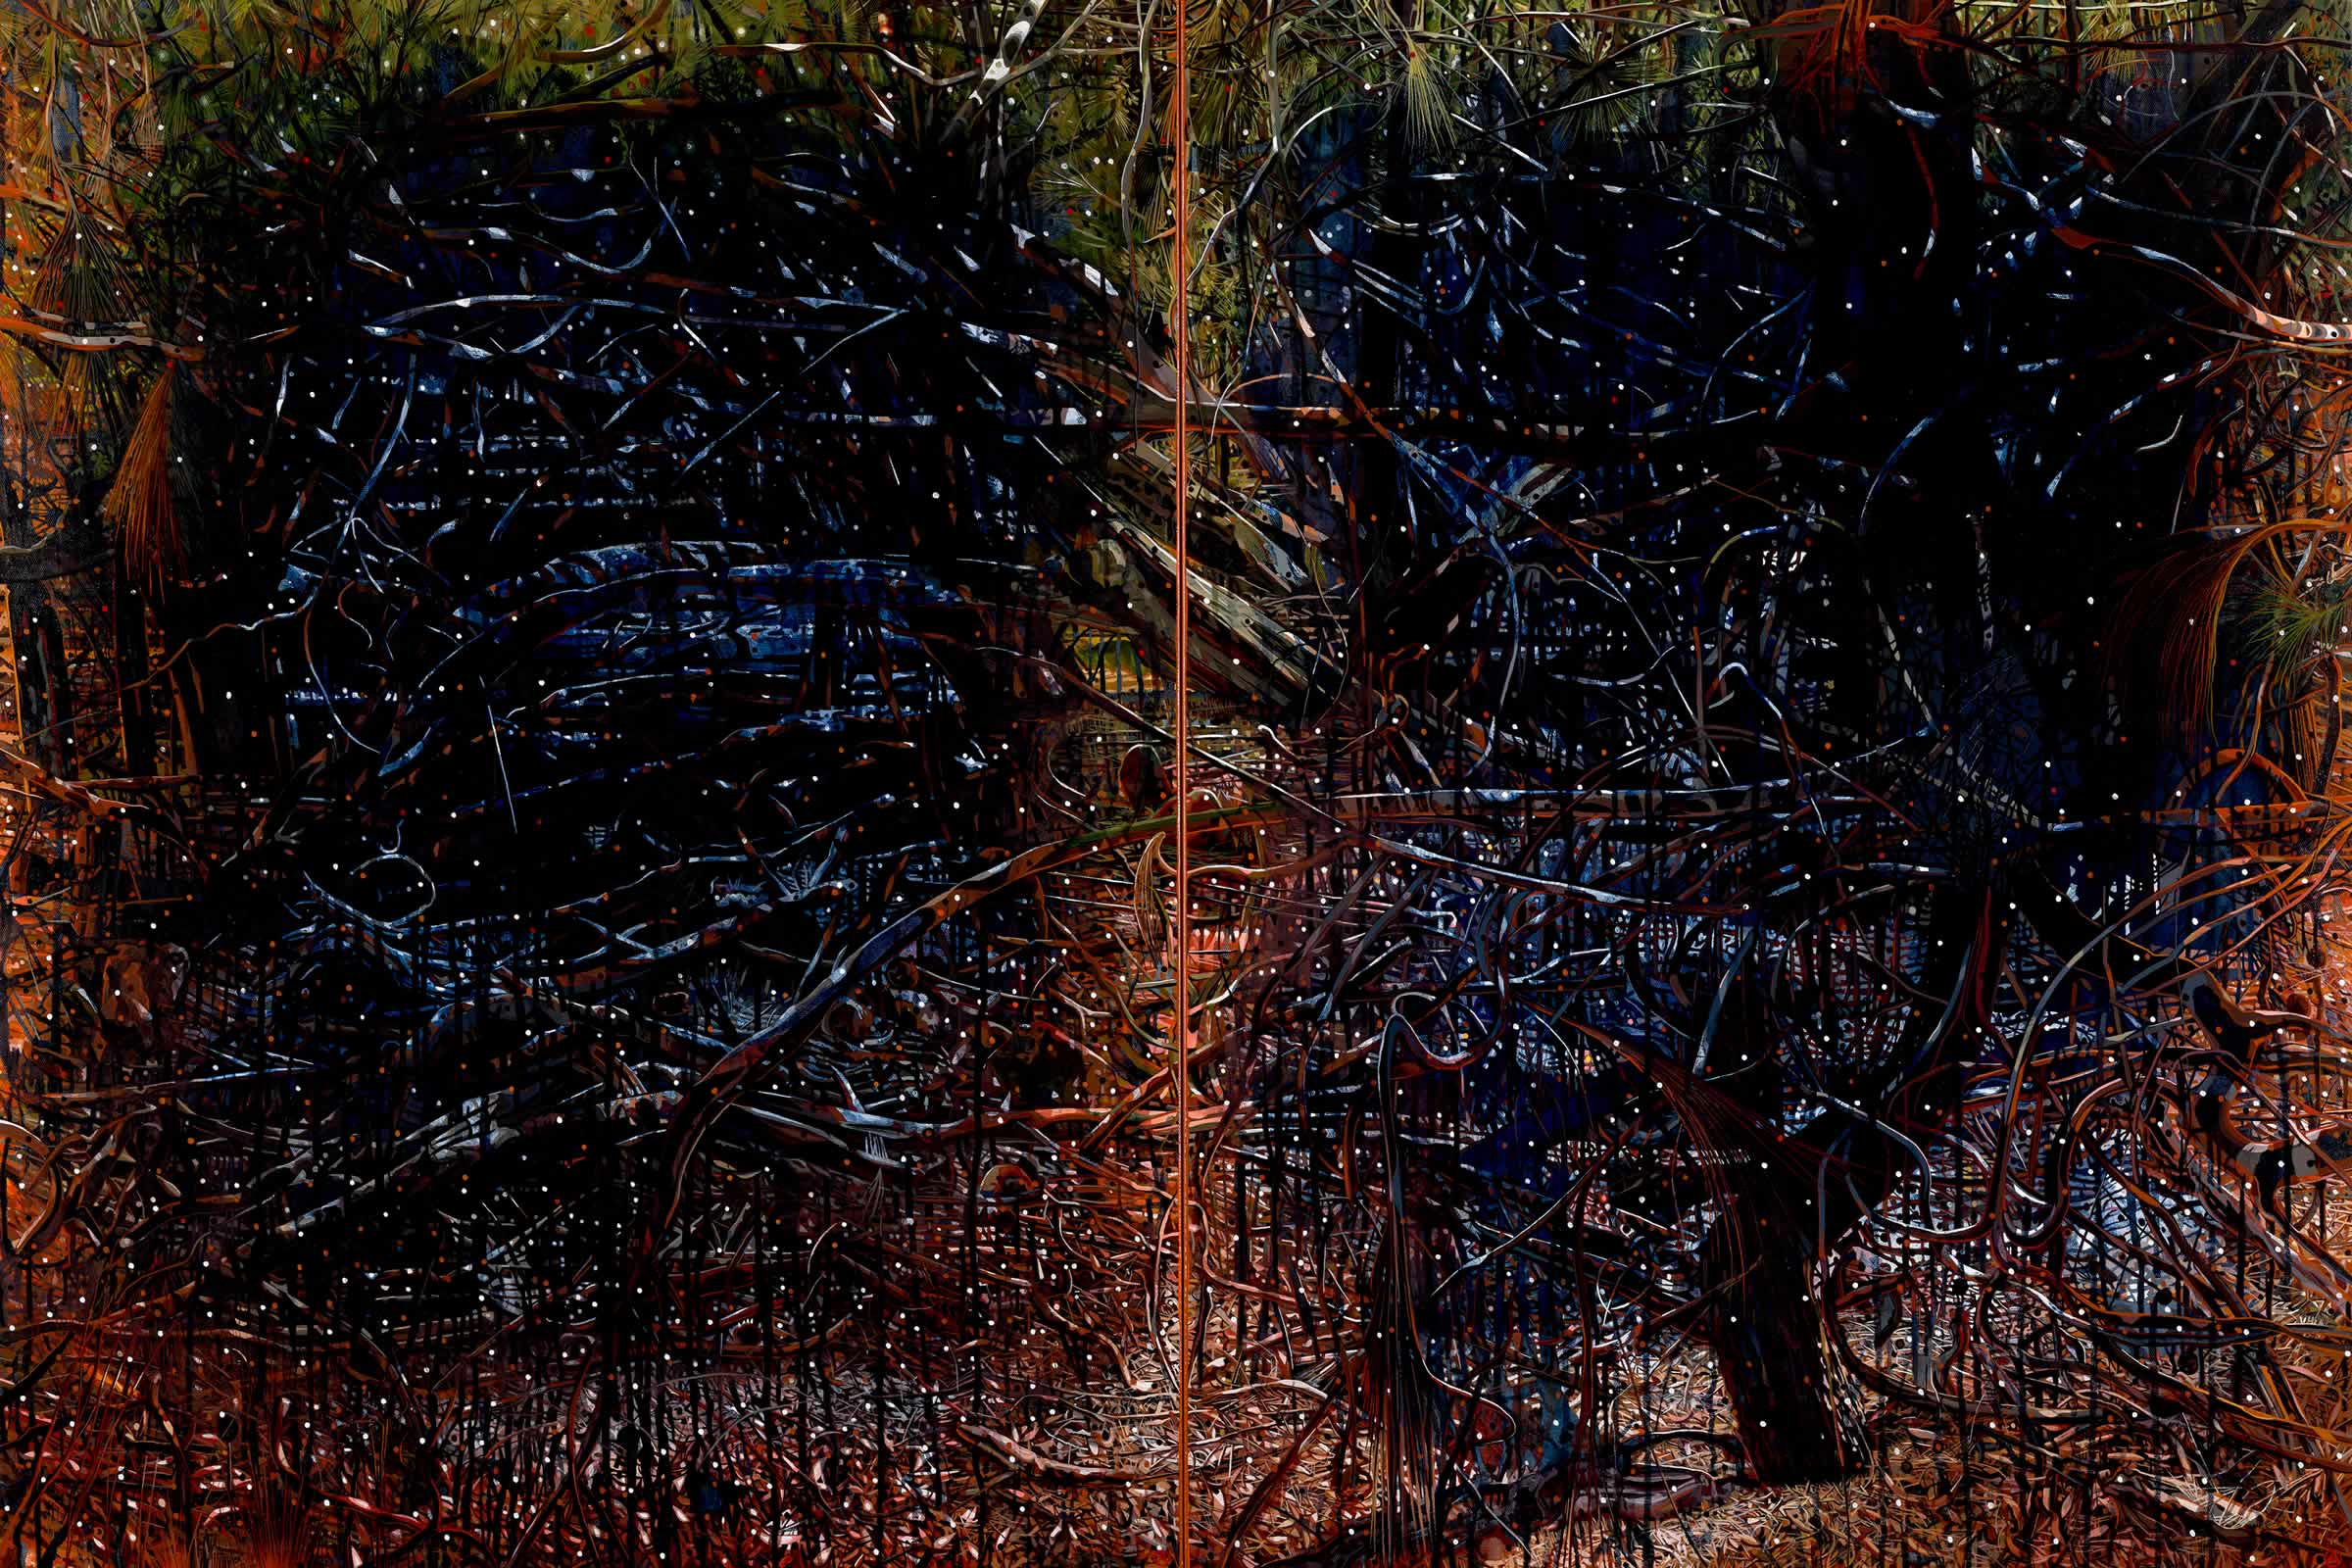 Painting by artist Raymond Arnold titled Toward light: Aboriginal landscape (2018) showing a dark and abstract casuarina landscape.